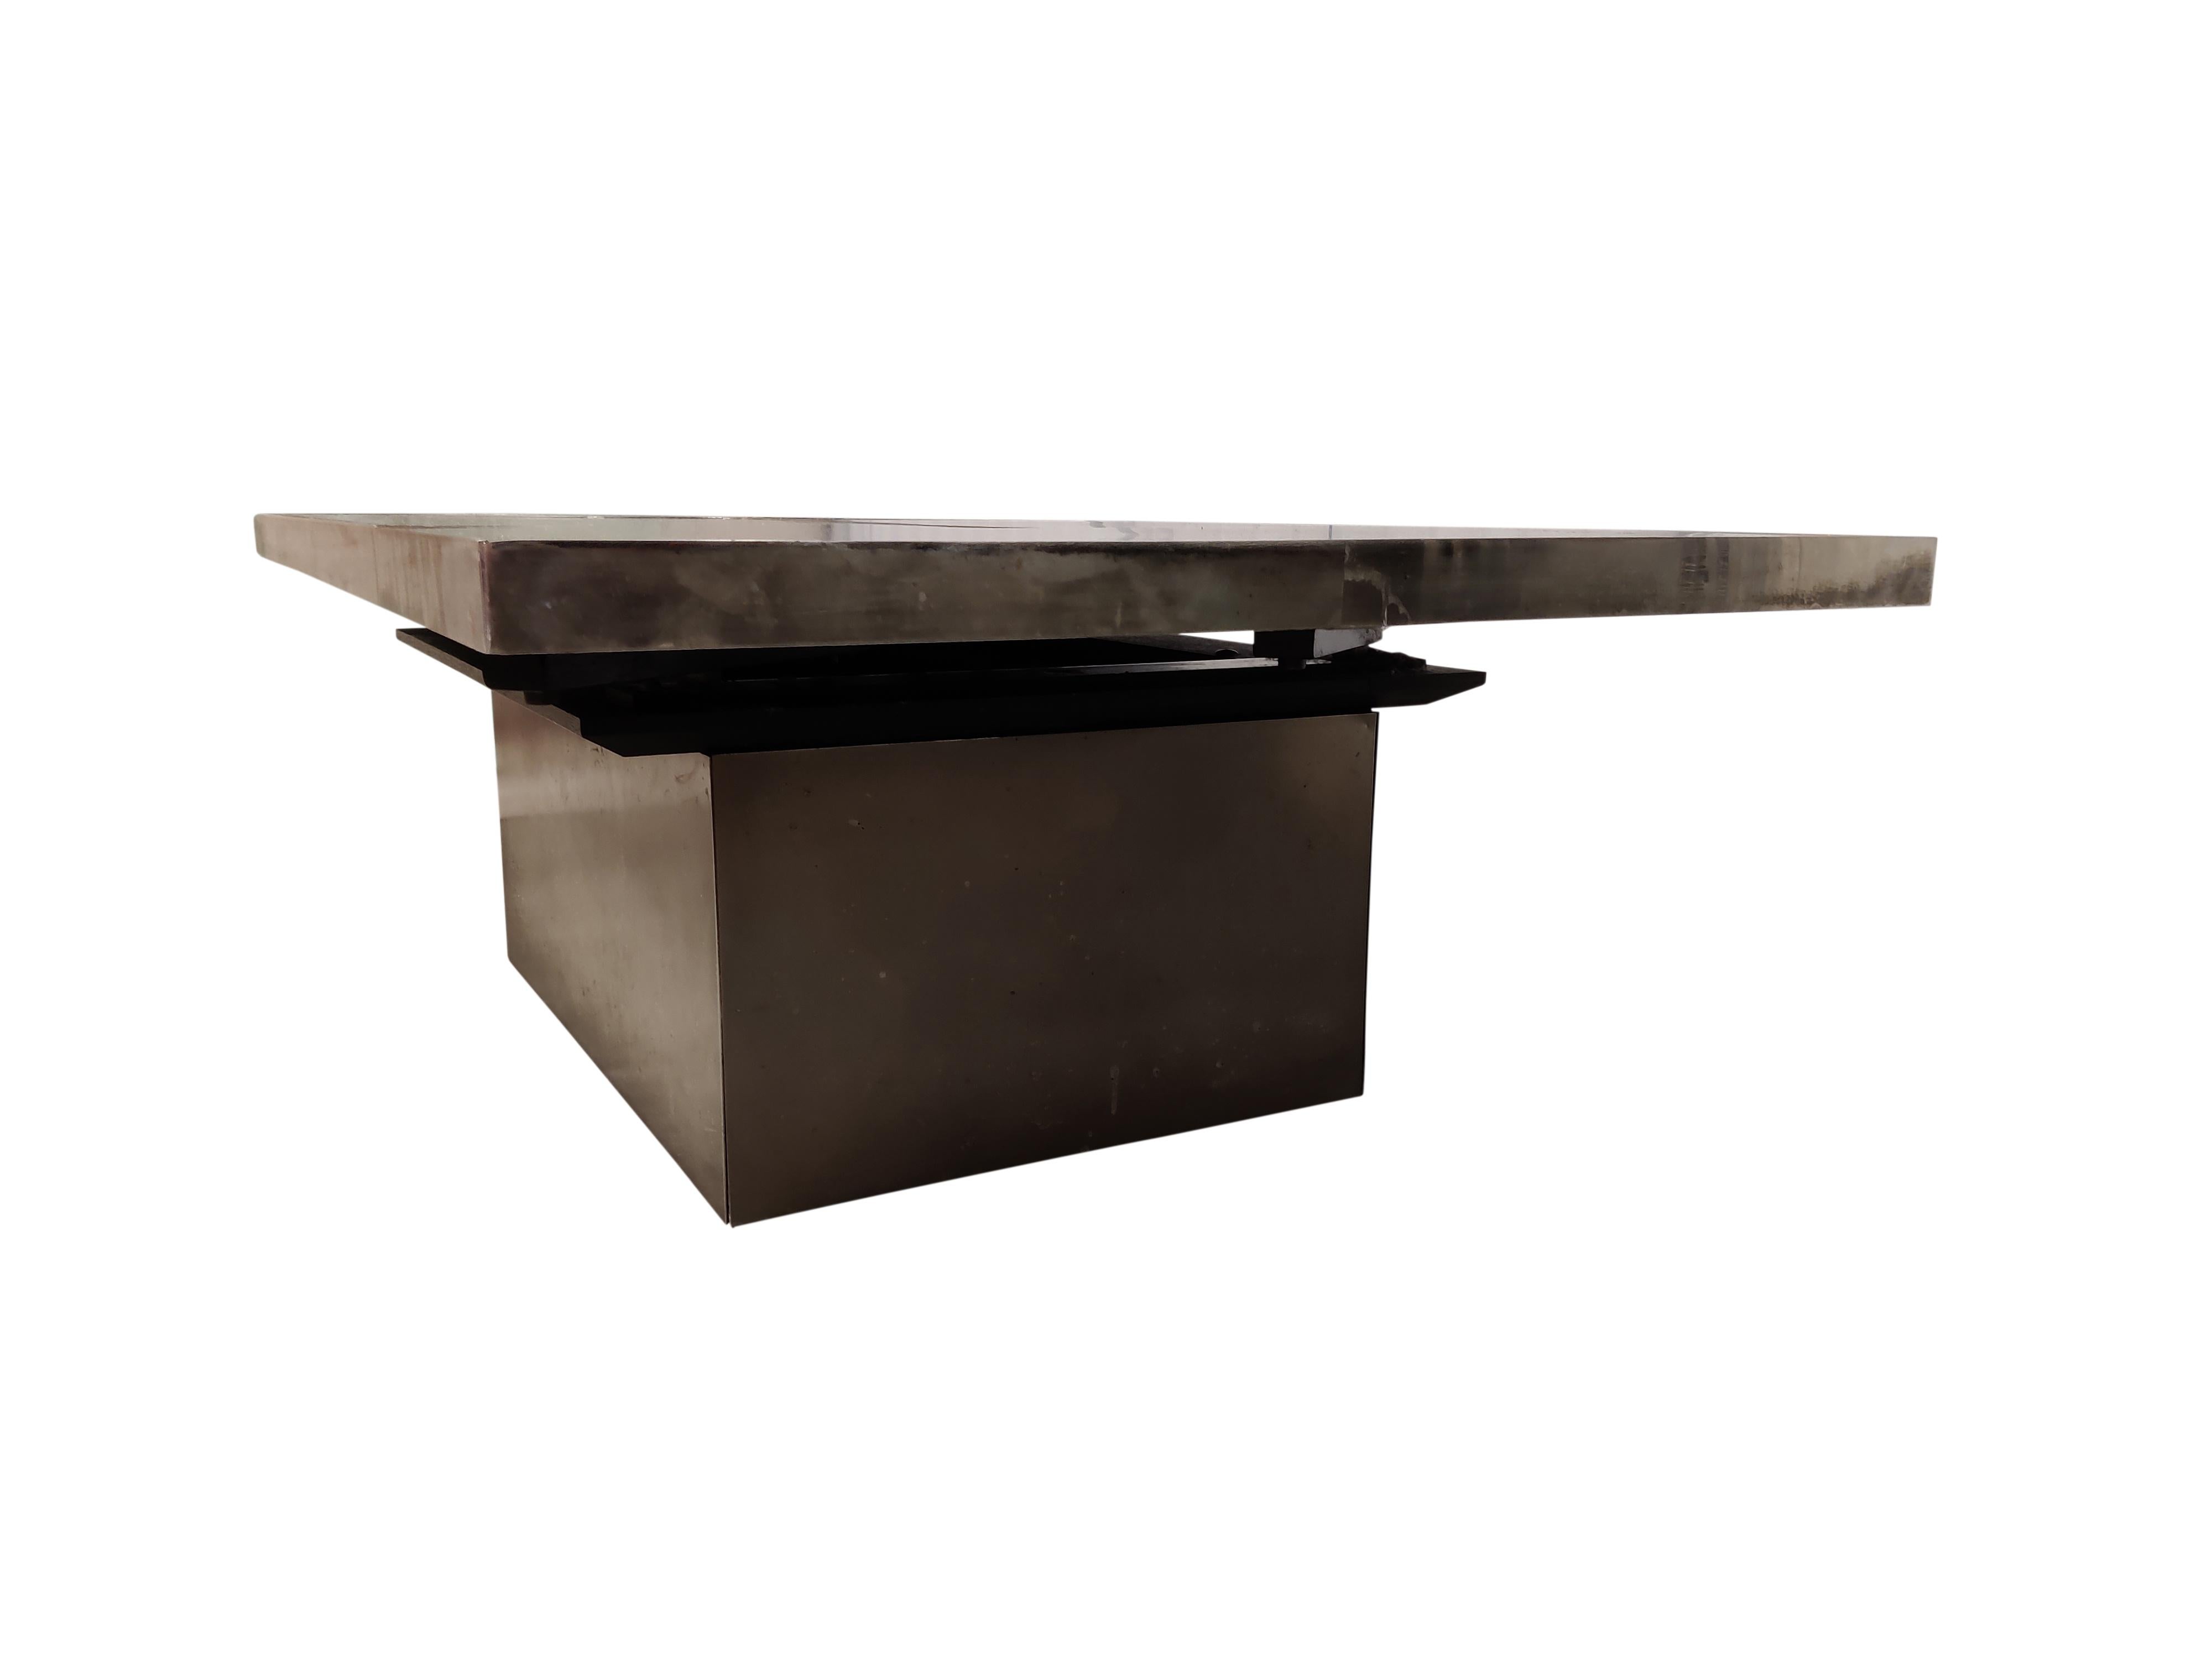 Hidden bar coffee table by Willy Rizzo.

This coffee table consists of two brushed steel pivoting parts that open up to showcase a mirrored bar compartment.

Condition: Used with some staining on the top but still offers a nice vintage feel. -